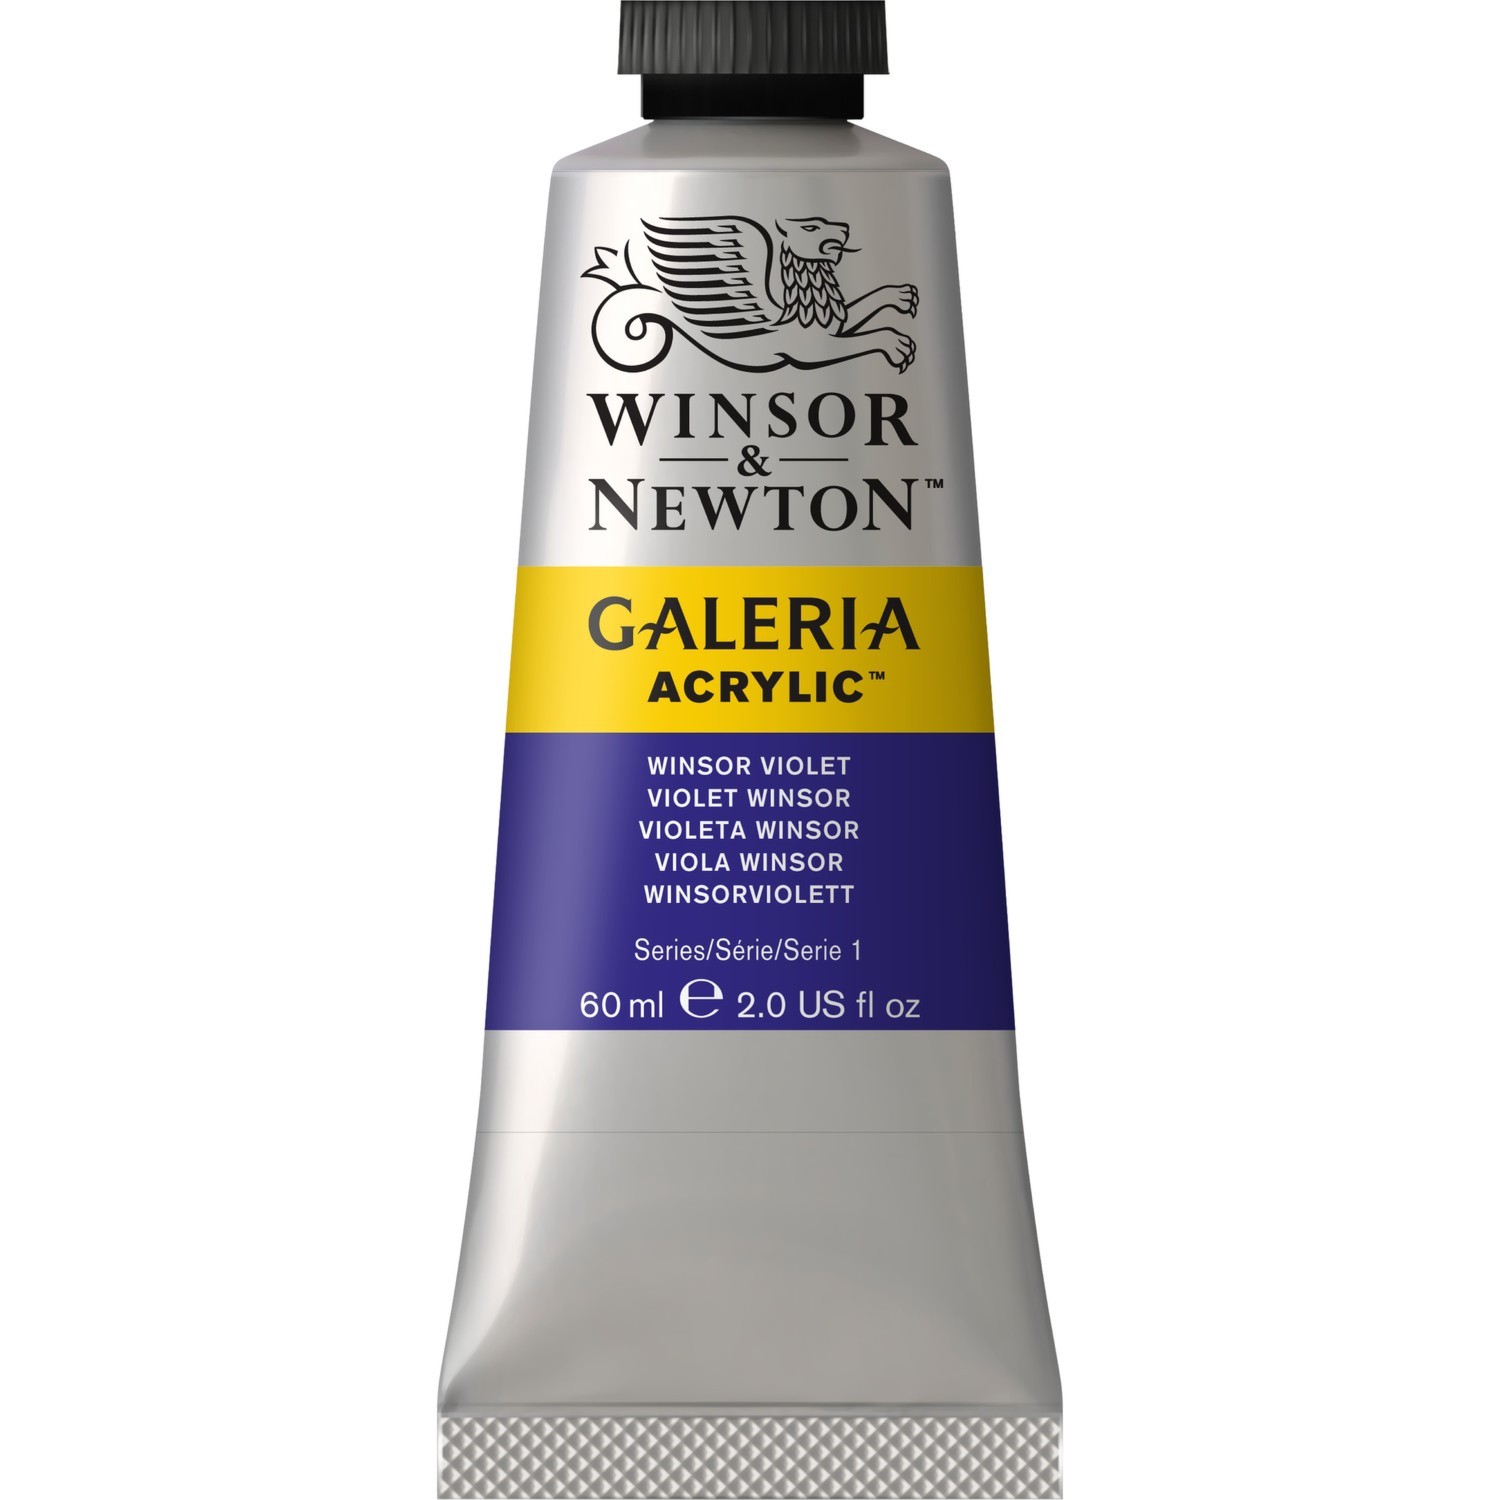 Winsor and Newton 60ml Galeria Acrylic Paint - Winsor Violet Image 1